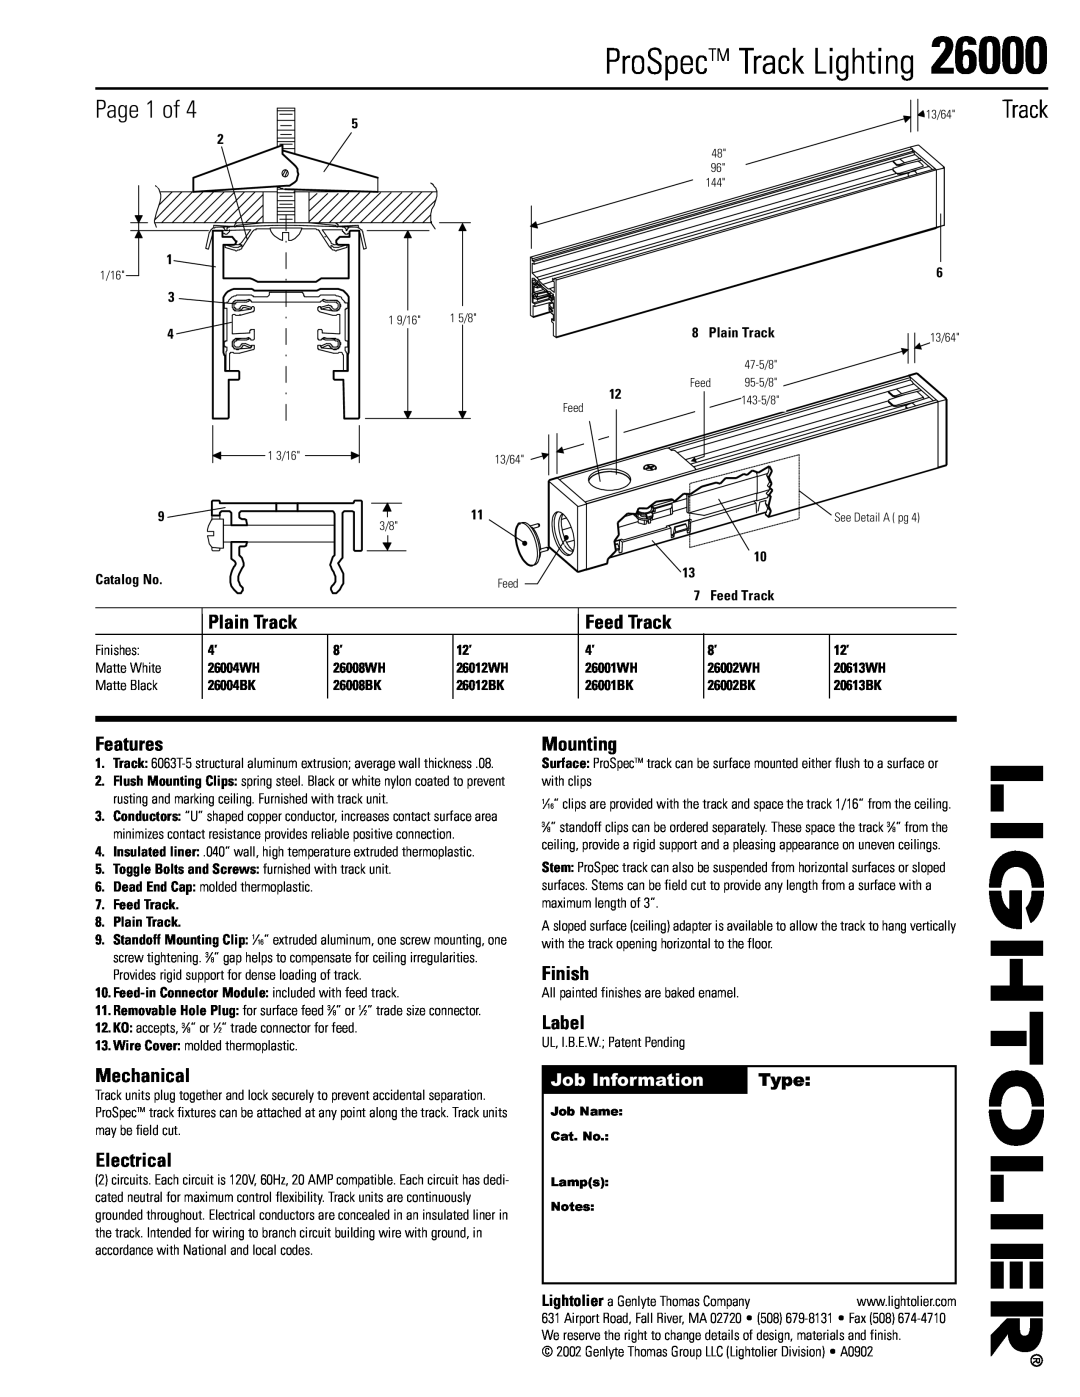 Lightolier 26000 manual ProSpecTM Track Lighting, Page 1 of, Plain Track, Feed Track, Features, Mounting, Finish, Label 